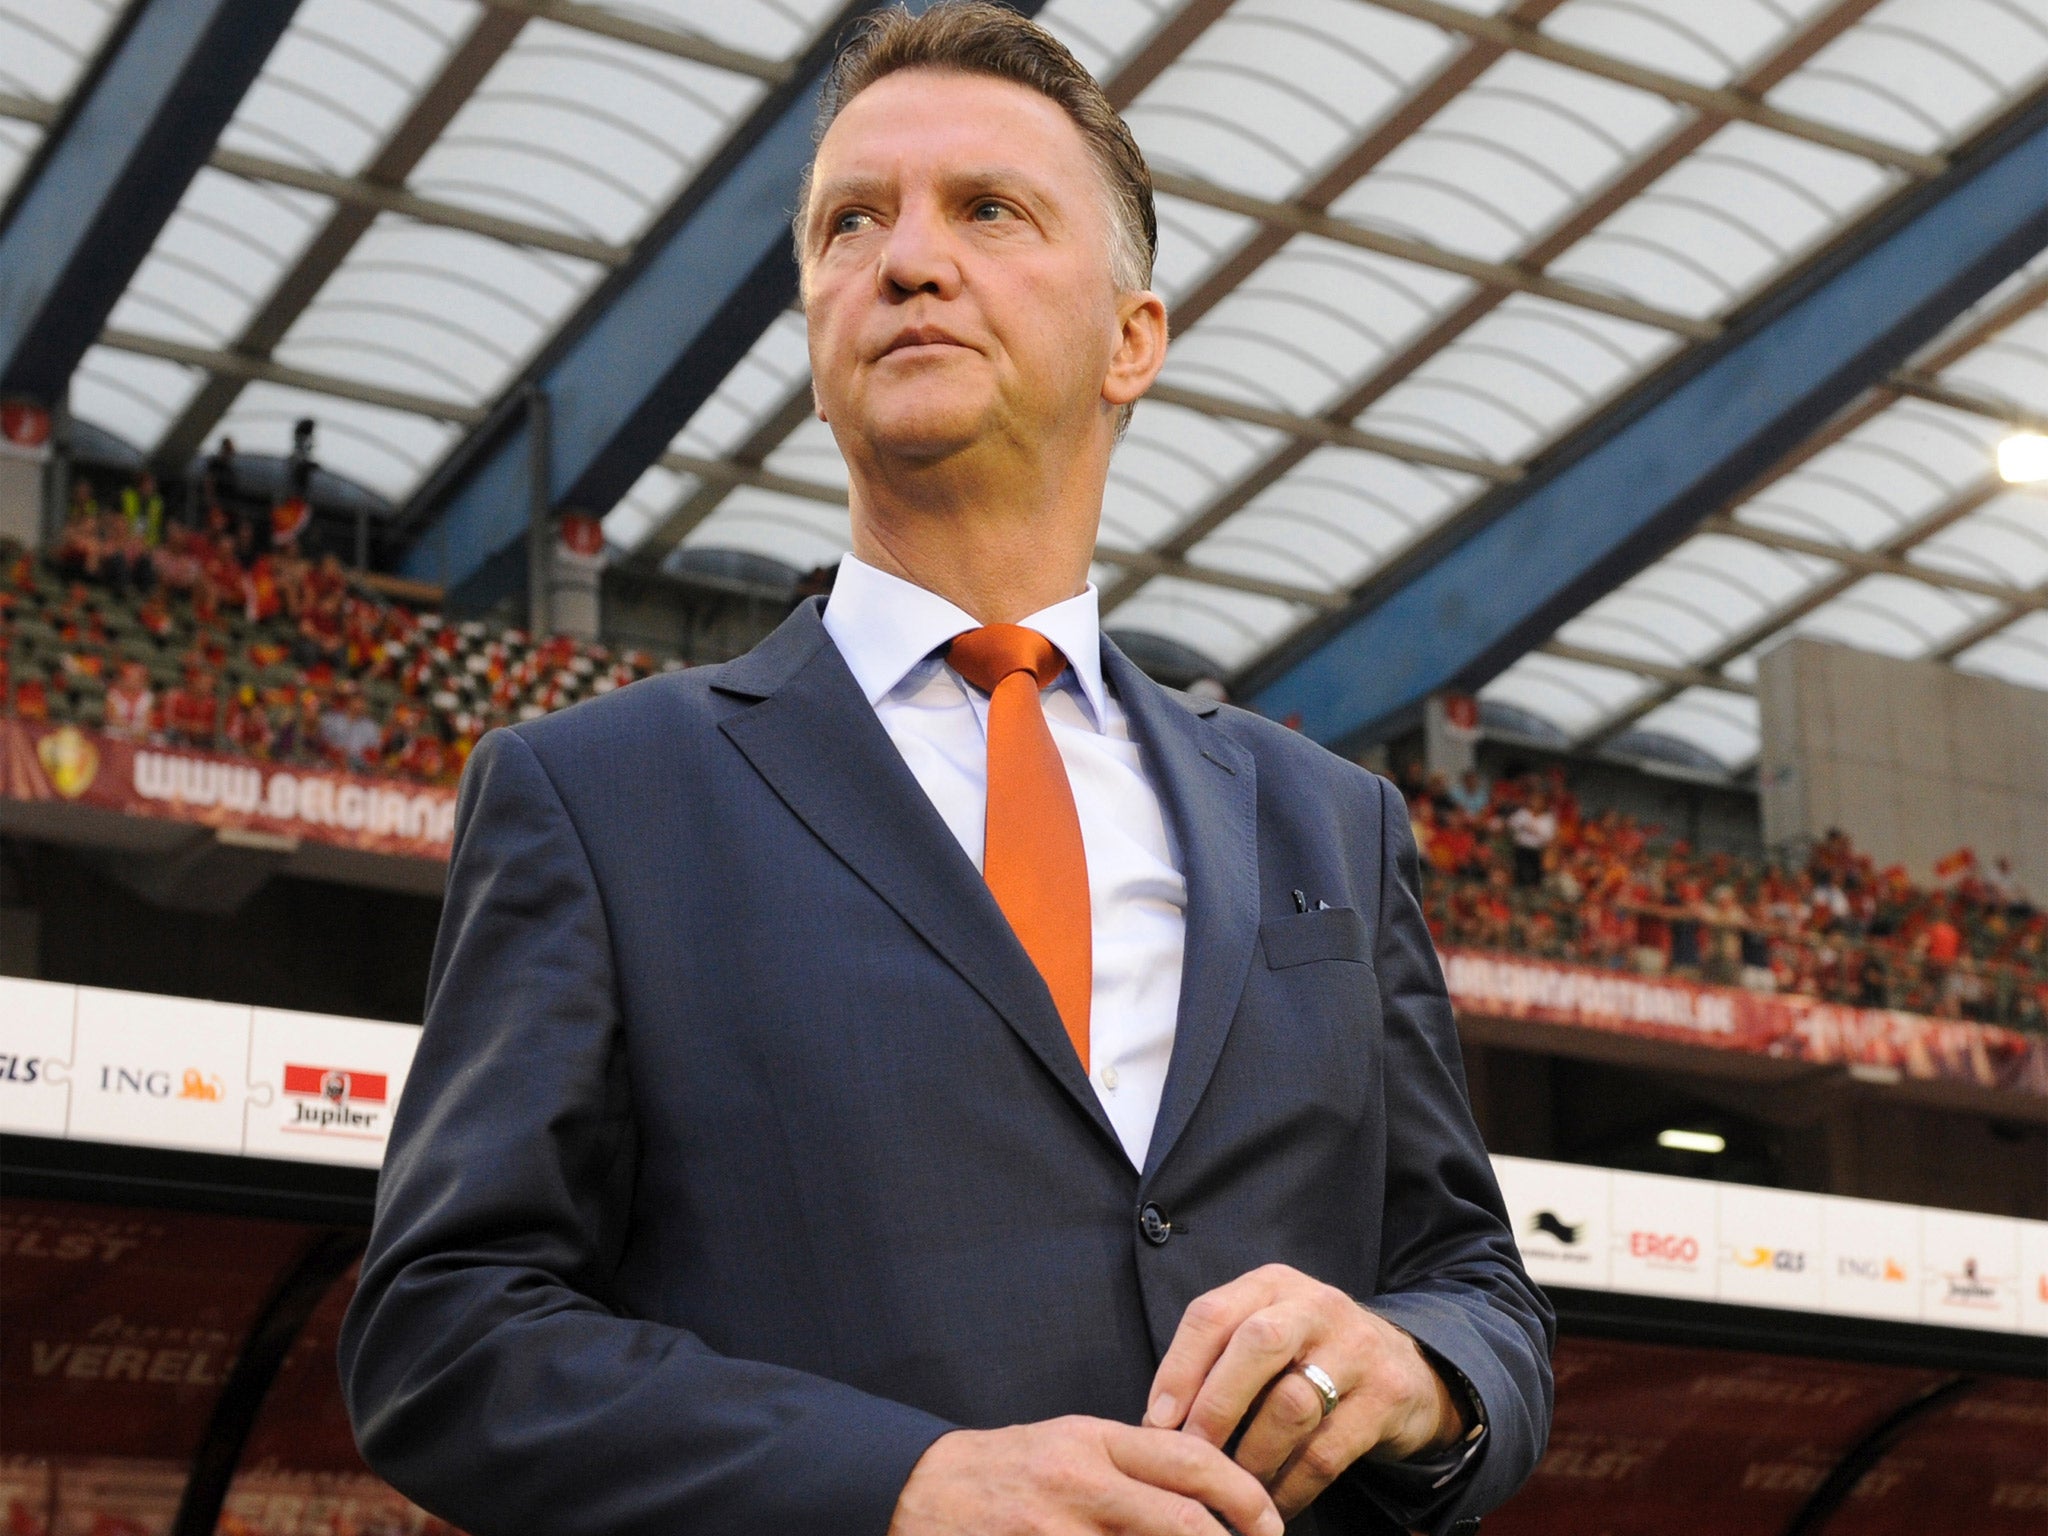 The Dutch FA does not want Louis van Gaal to be distracted by club matters before the World Cup